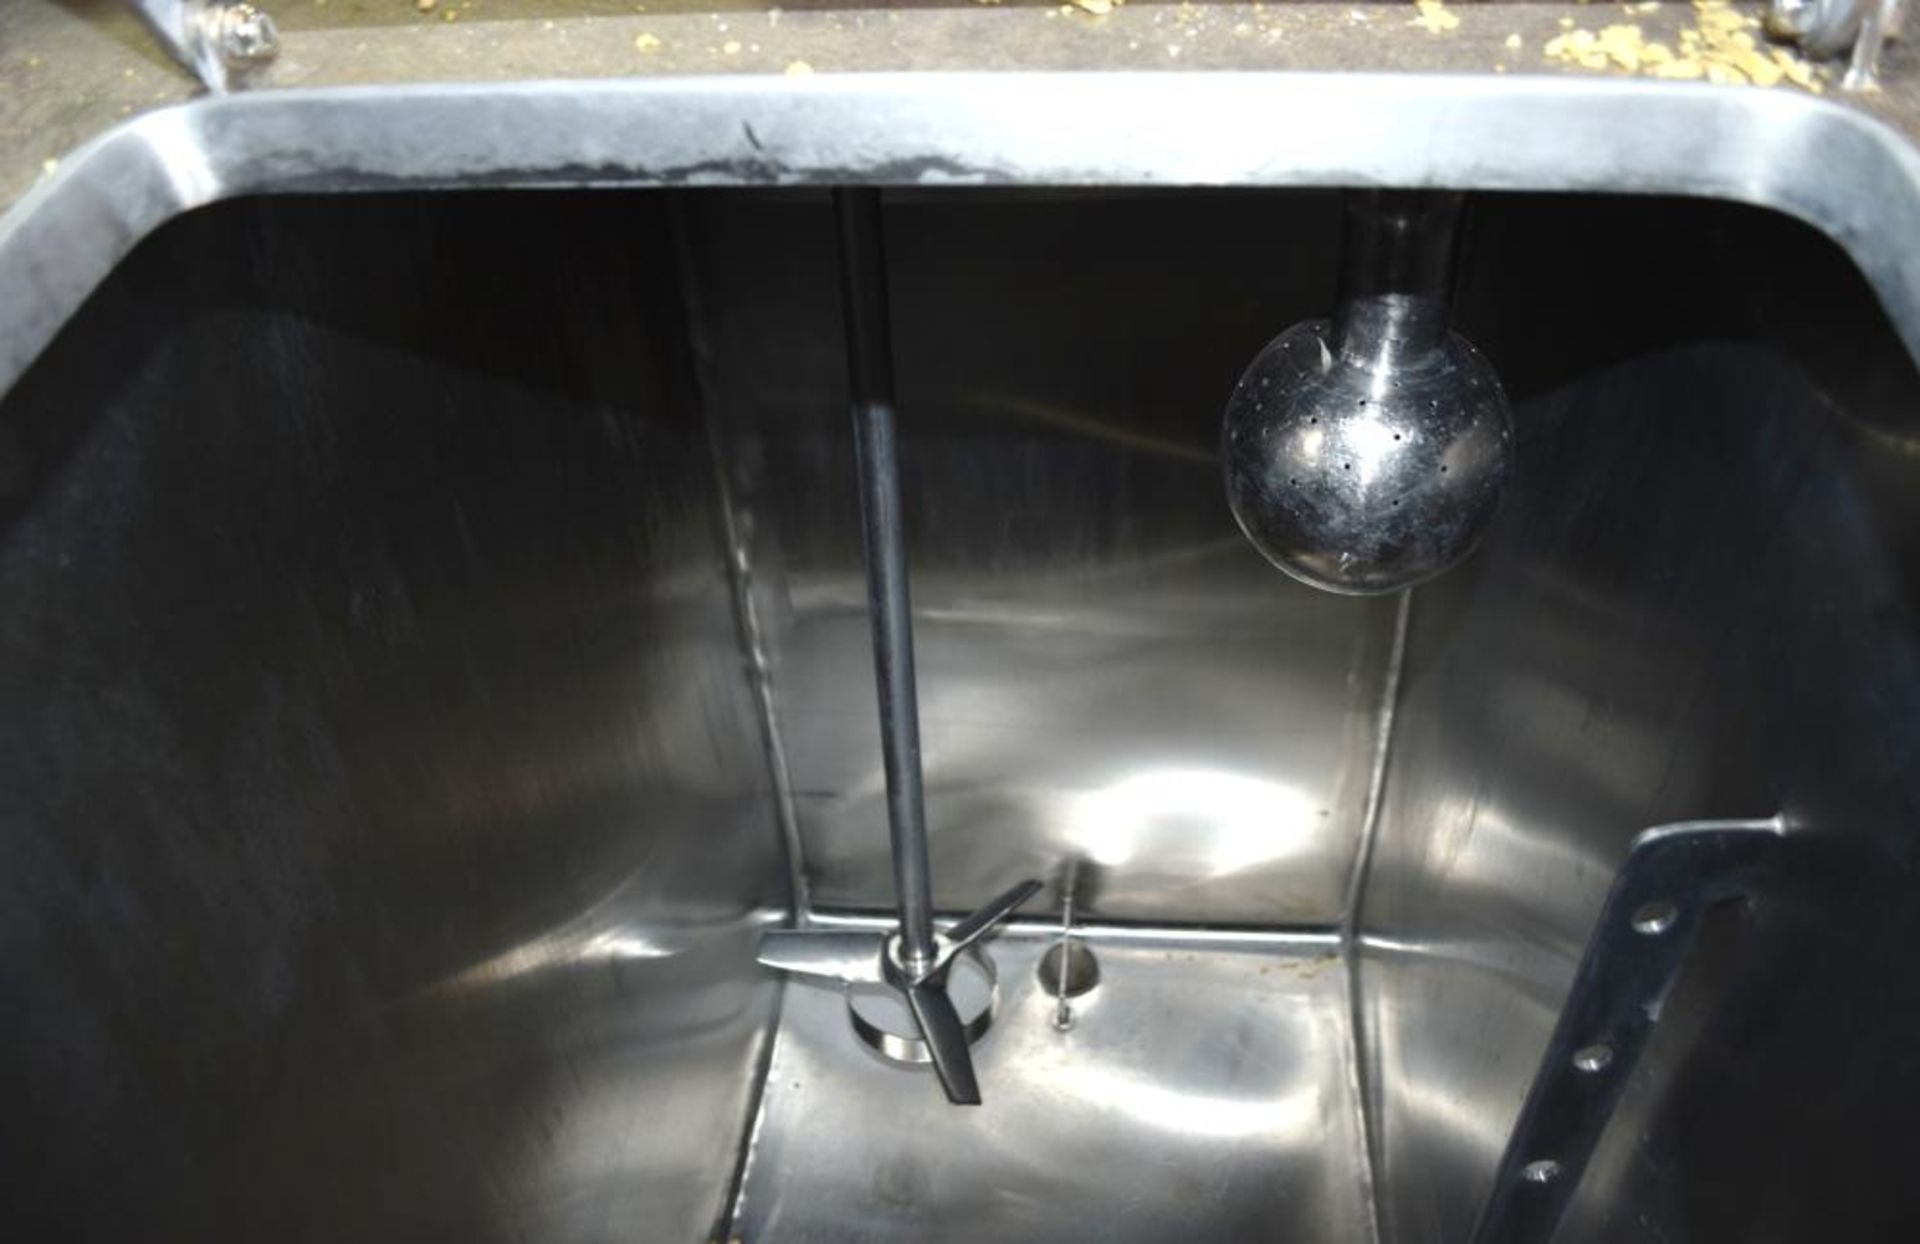 6 Compartment Rectangular Stainless Steel Tank - Image 16 of 28